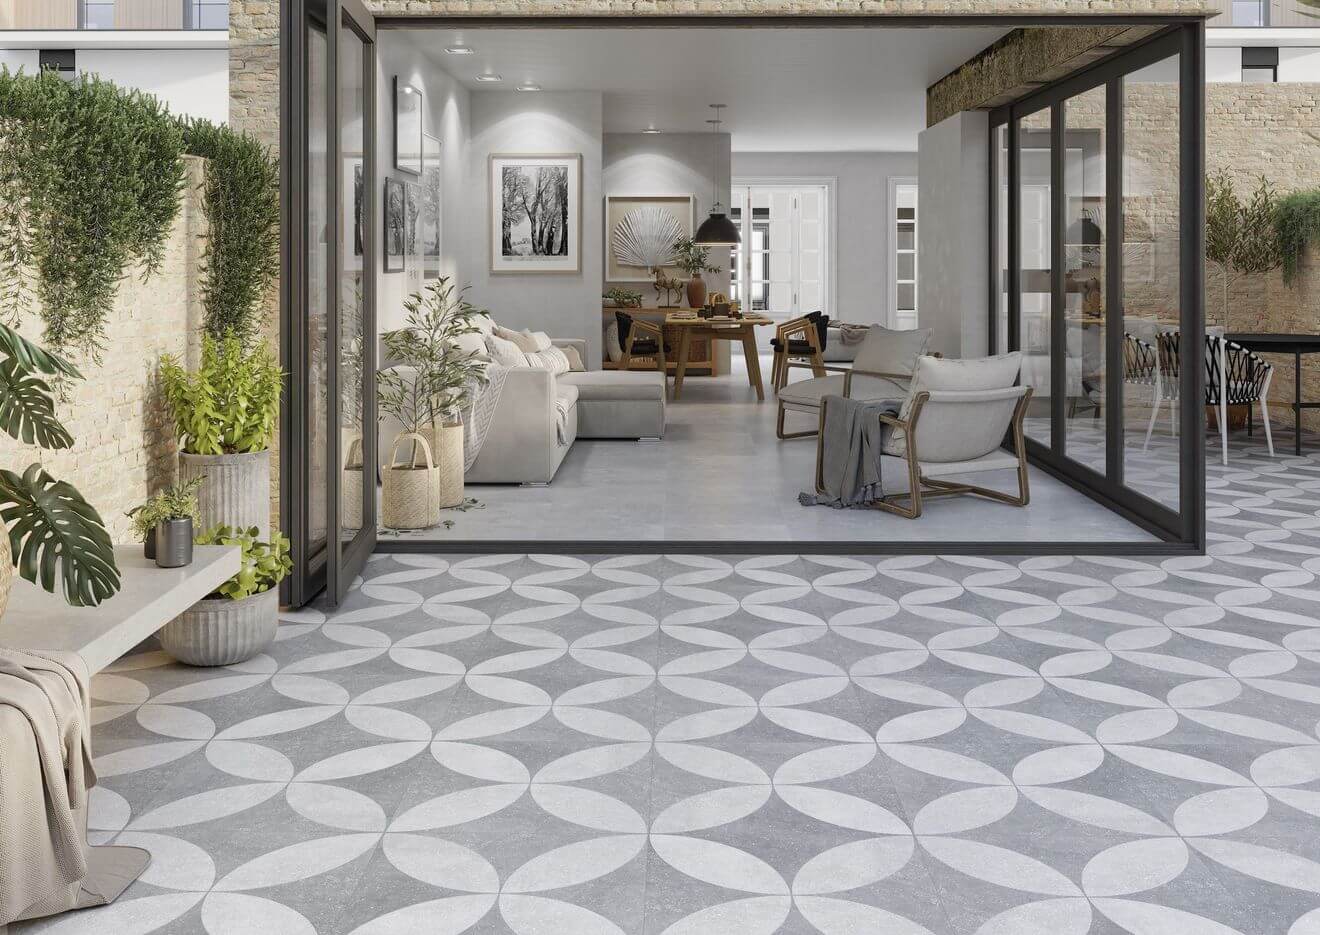 18- Tiling with Geometric Accents